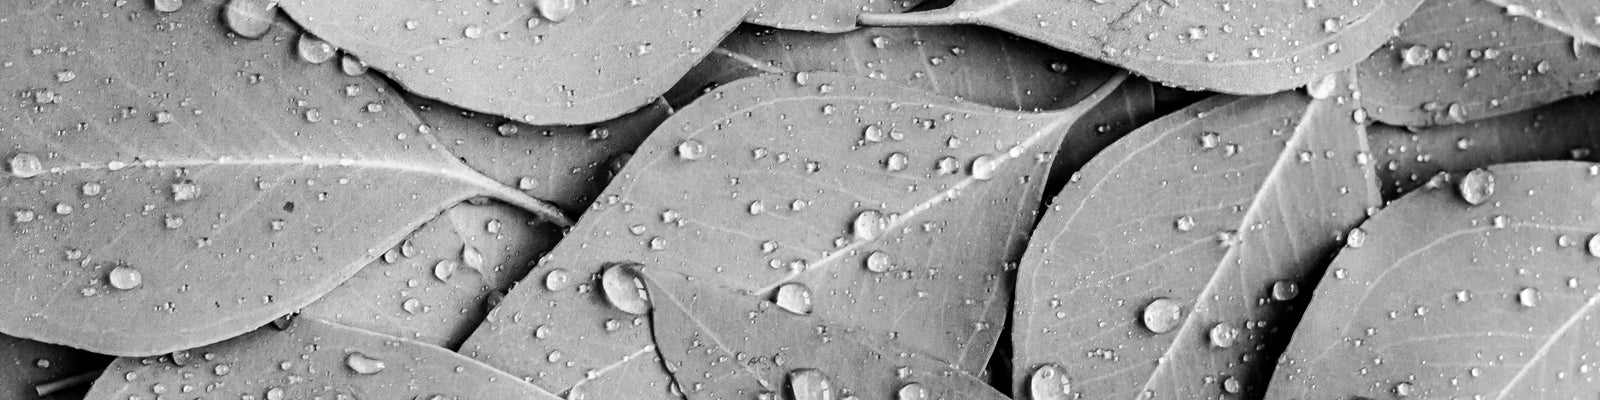 Greyscale image of eucalptus leaves scattered with droplets of water